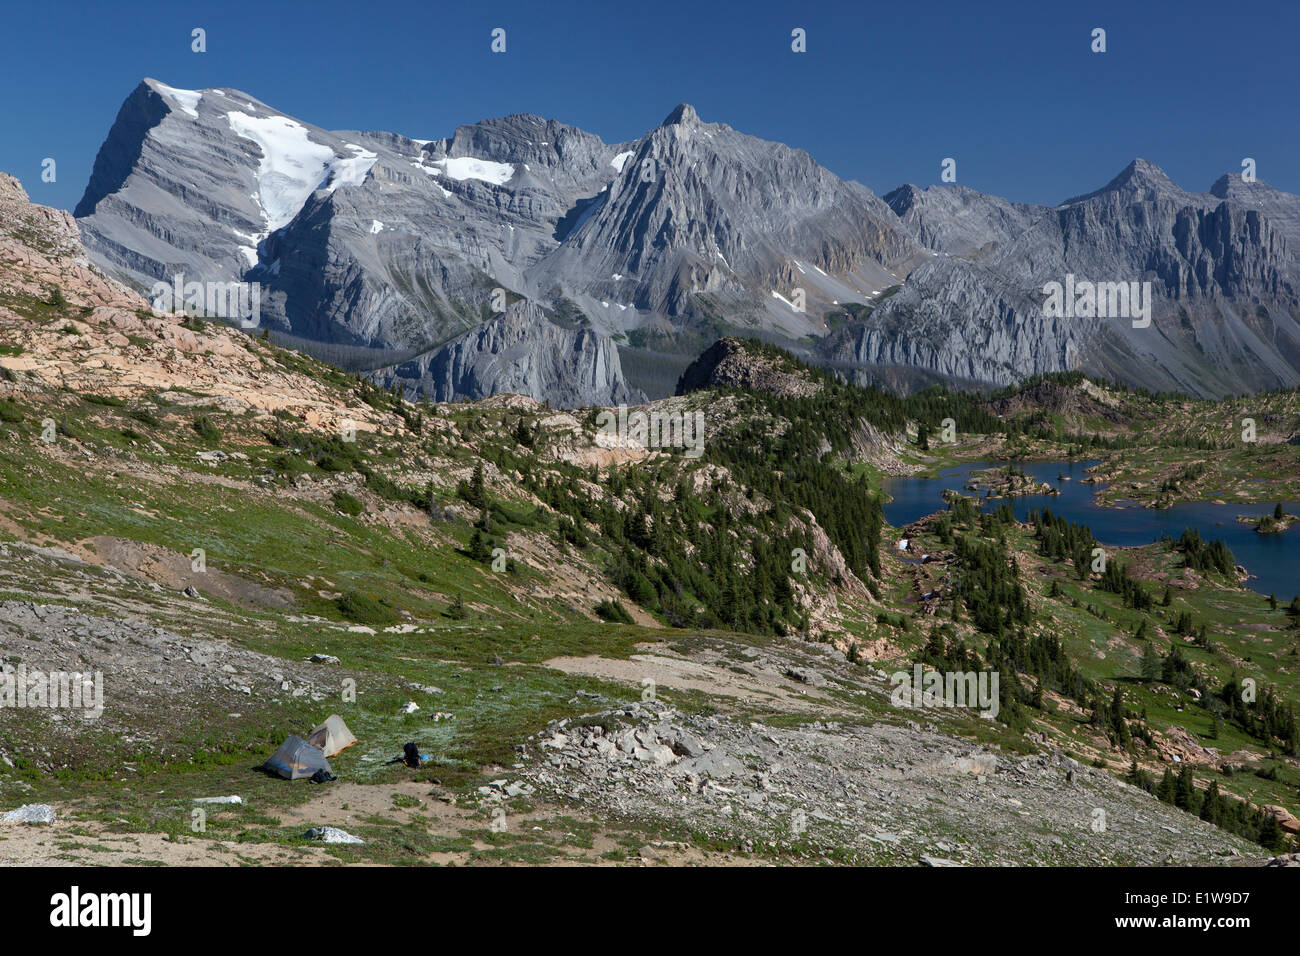 Tents at the pass above Lower Limestone Lakes Basin Mount Abruzzi Mount Lancaster Mount Marconi Mount Minton Height the Rockies Stock Photo